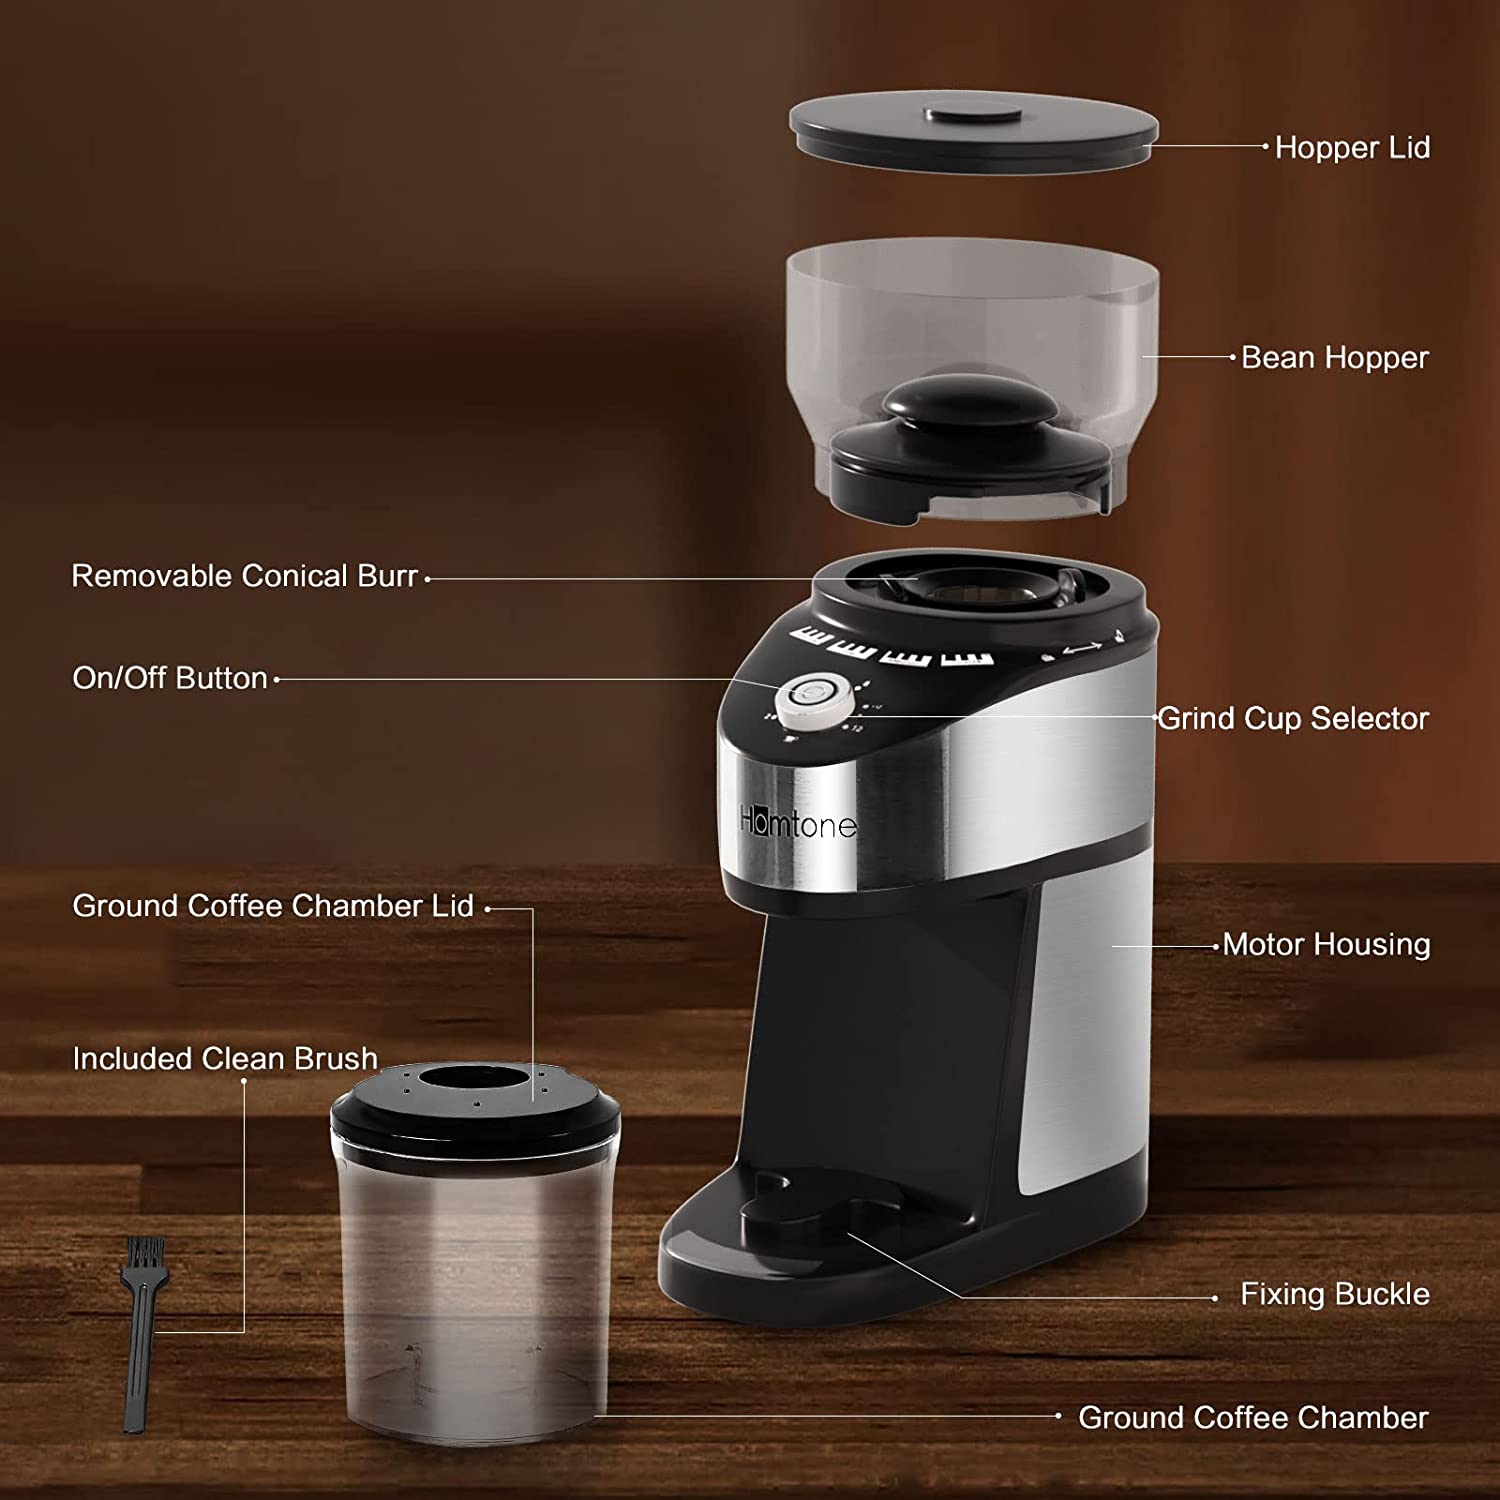 BEEONE Conical Burr Coffee Grinder with Digital Control, Espresso Grinder  with 31 Precise Settings for 1-10 Cups, Coffee Grinder Electric with Time